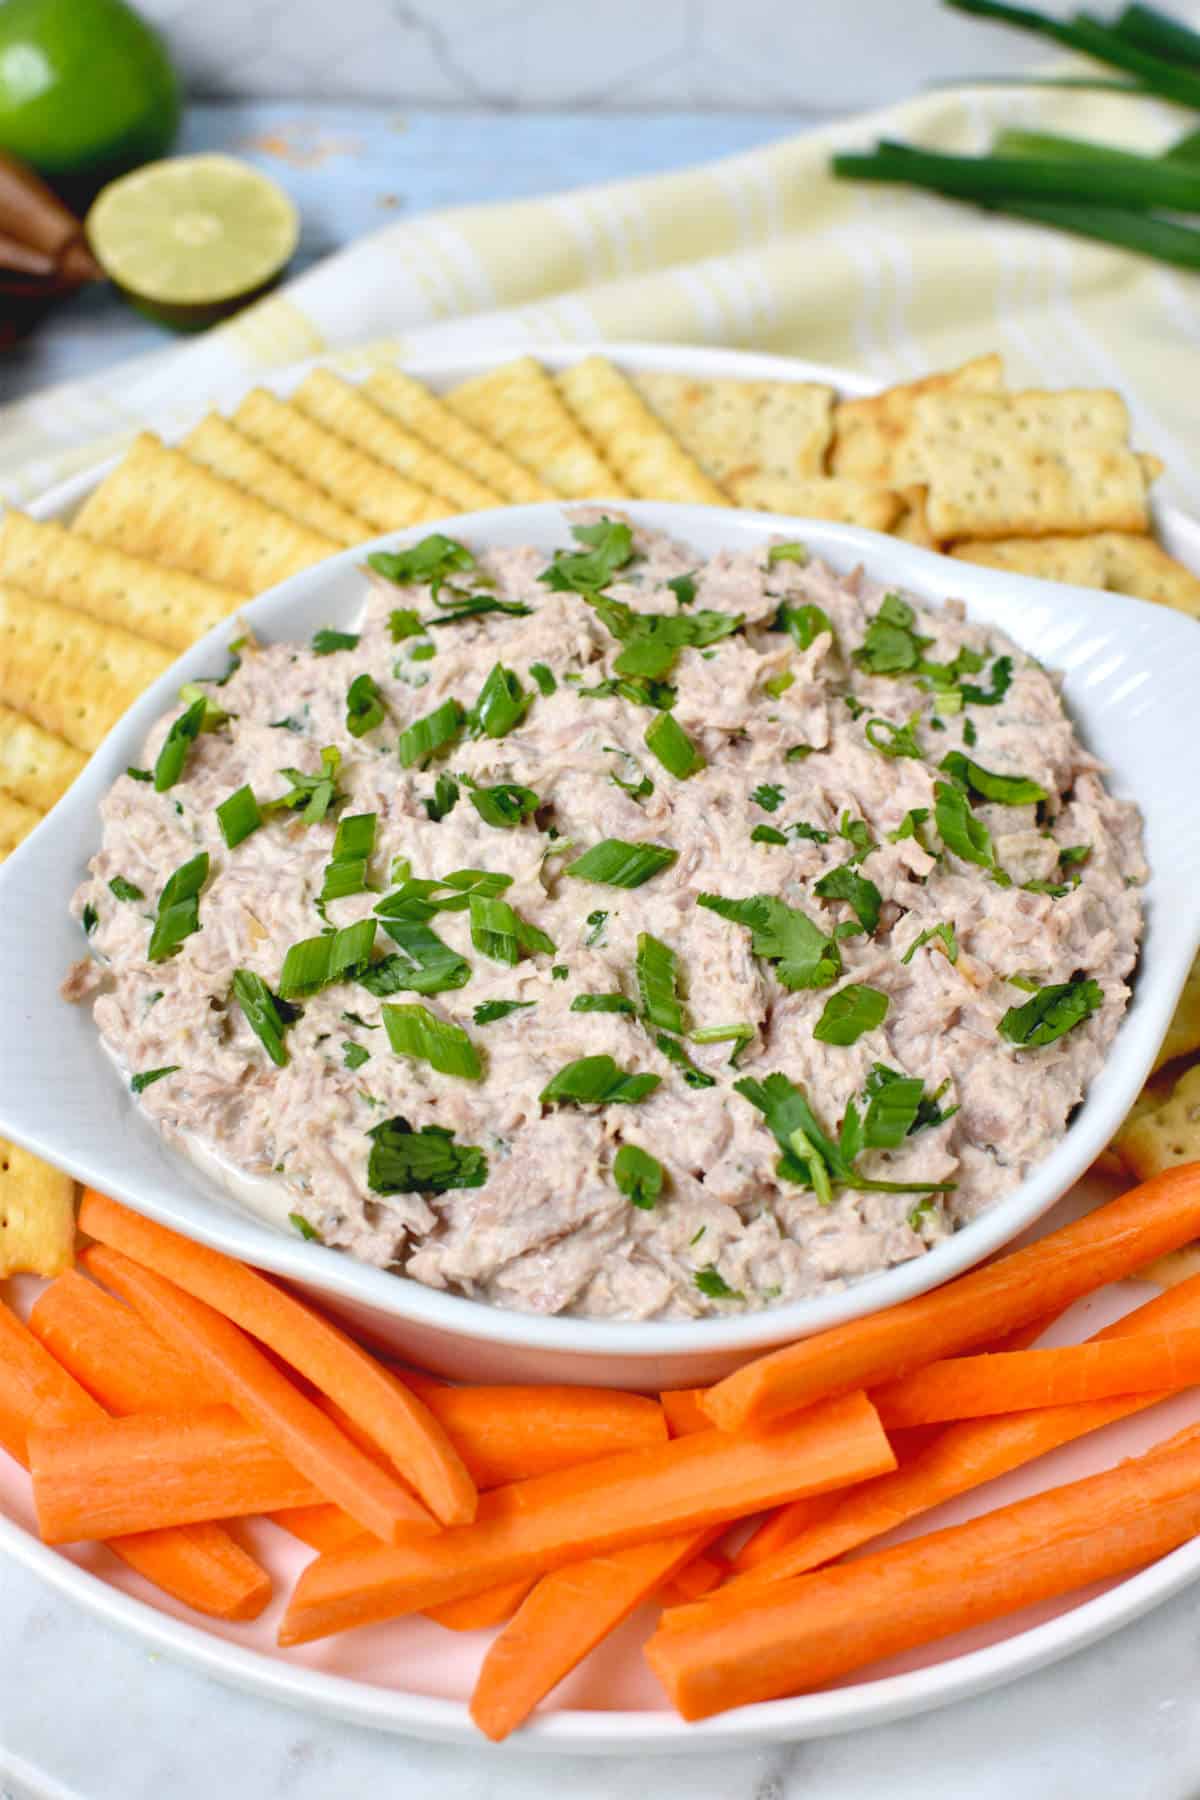 tuna dip with crackers and carrots.